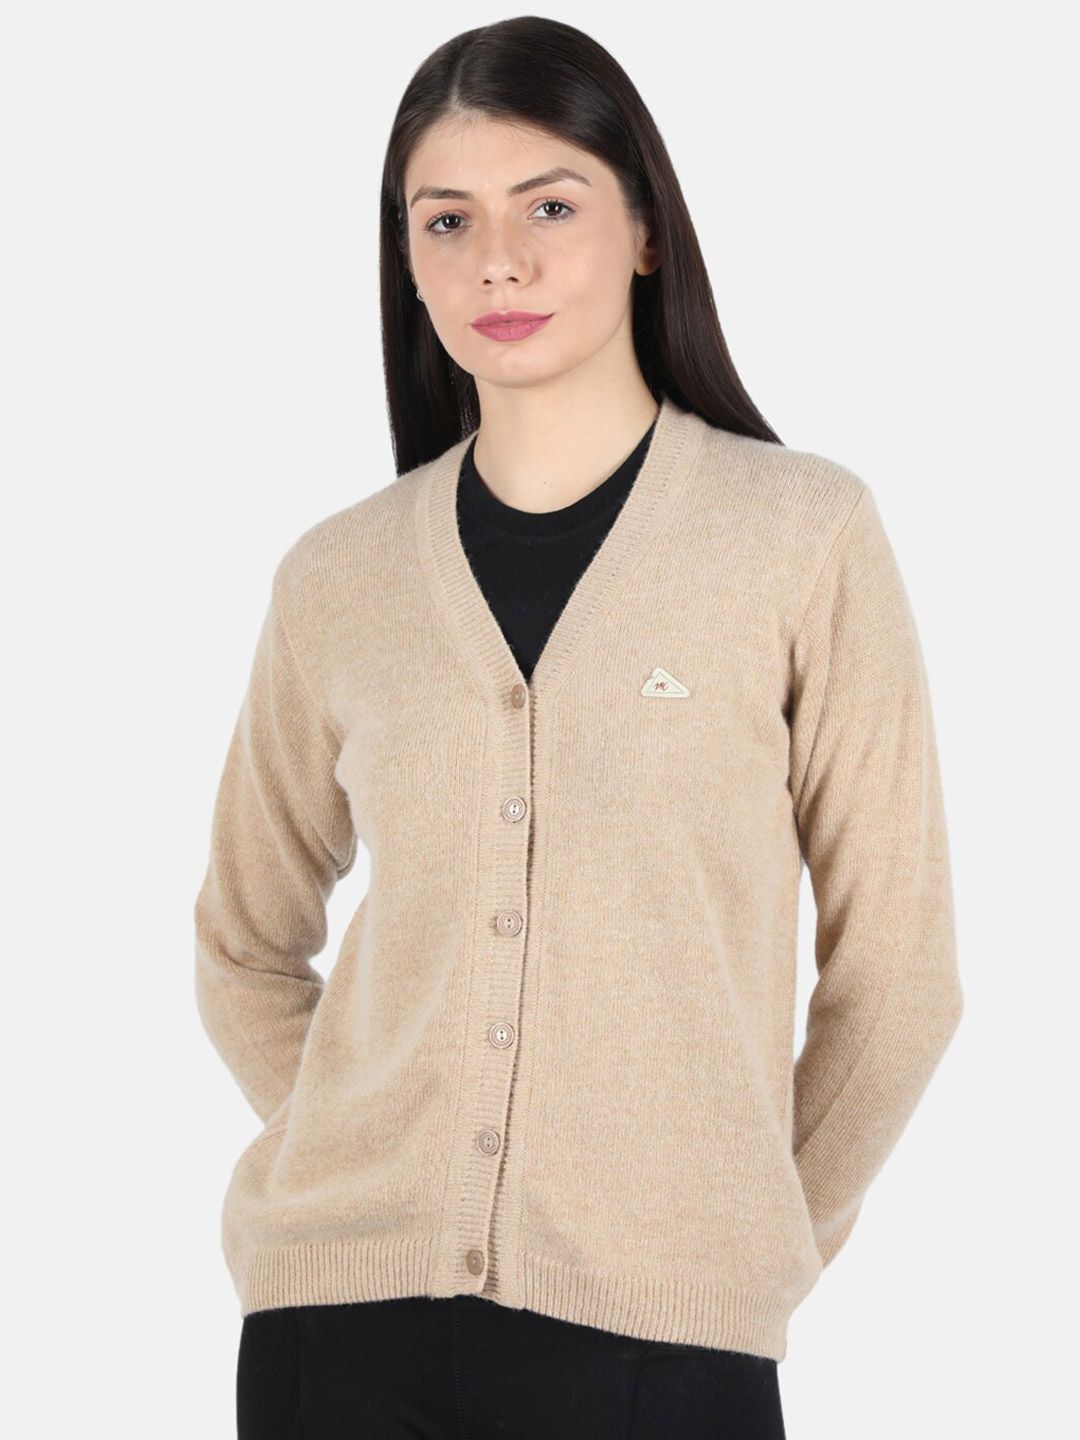 Monte Carlo Women's Lambs Wool Beige Solid V Neck Cardigan Price in India